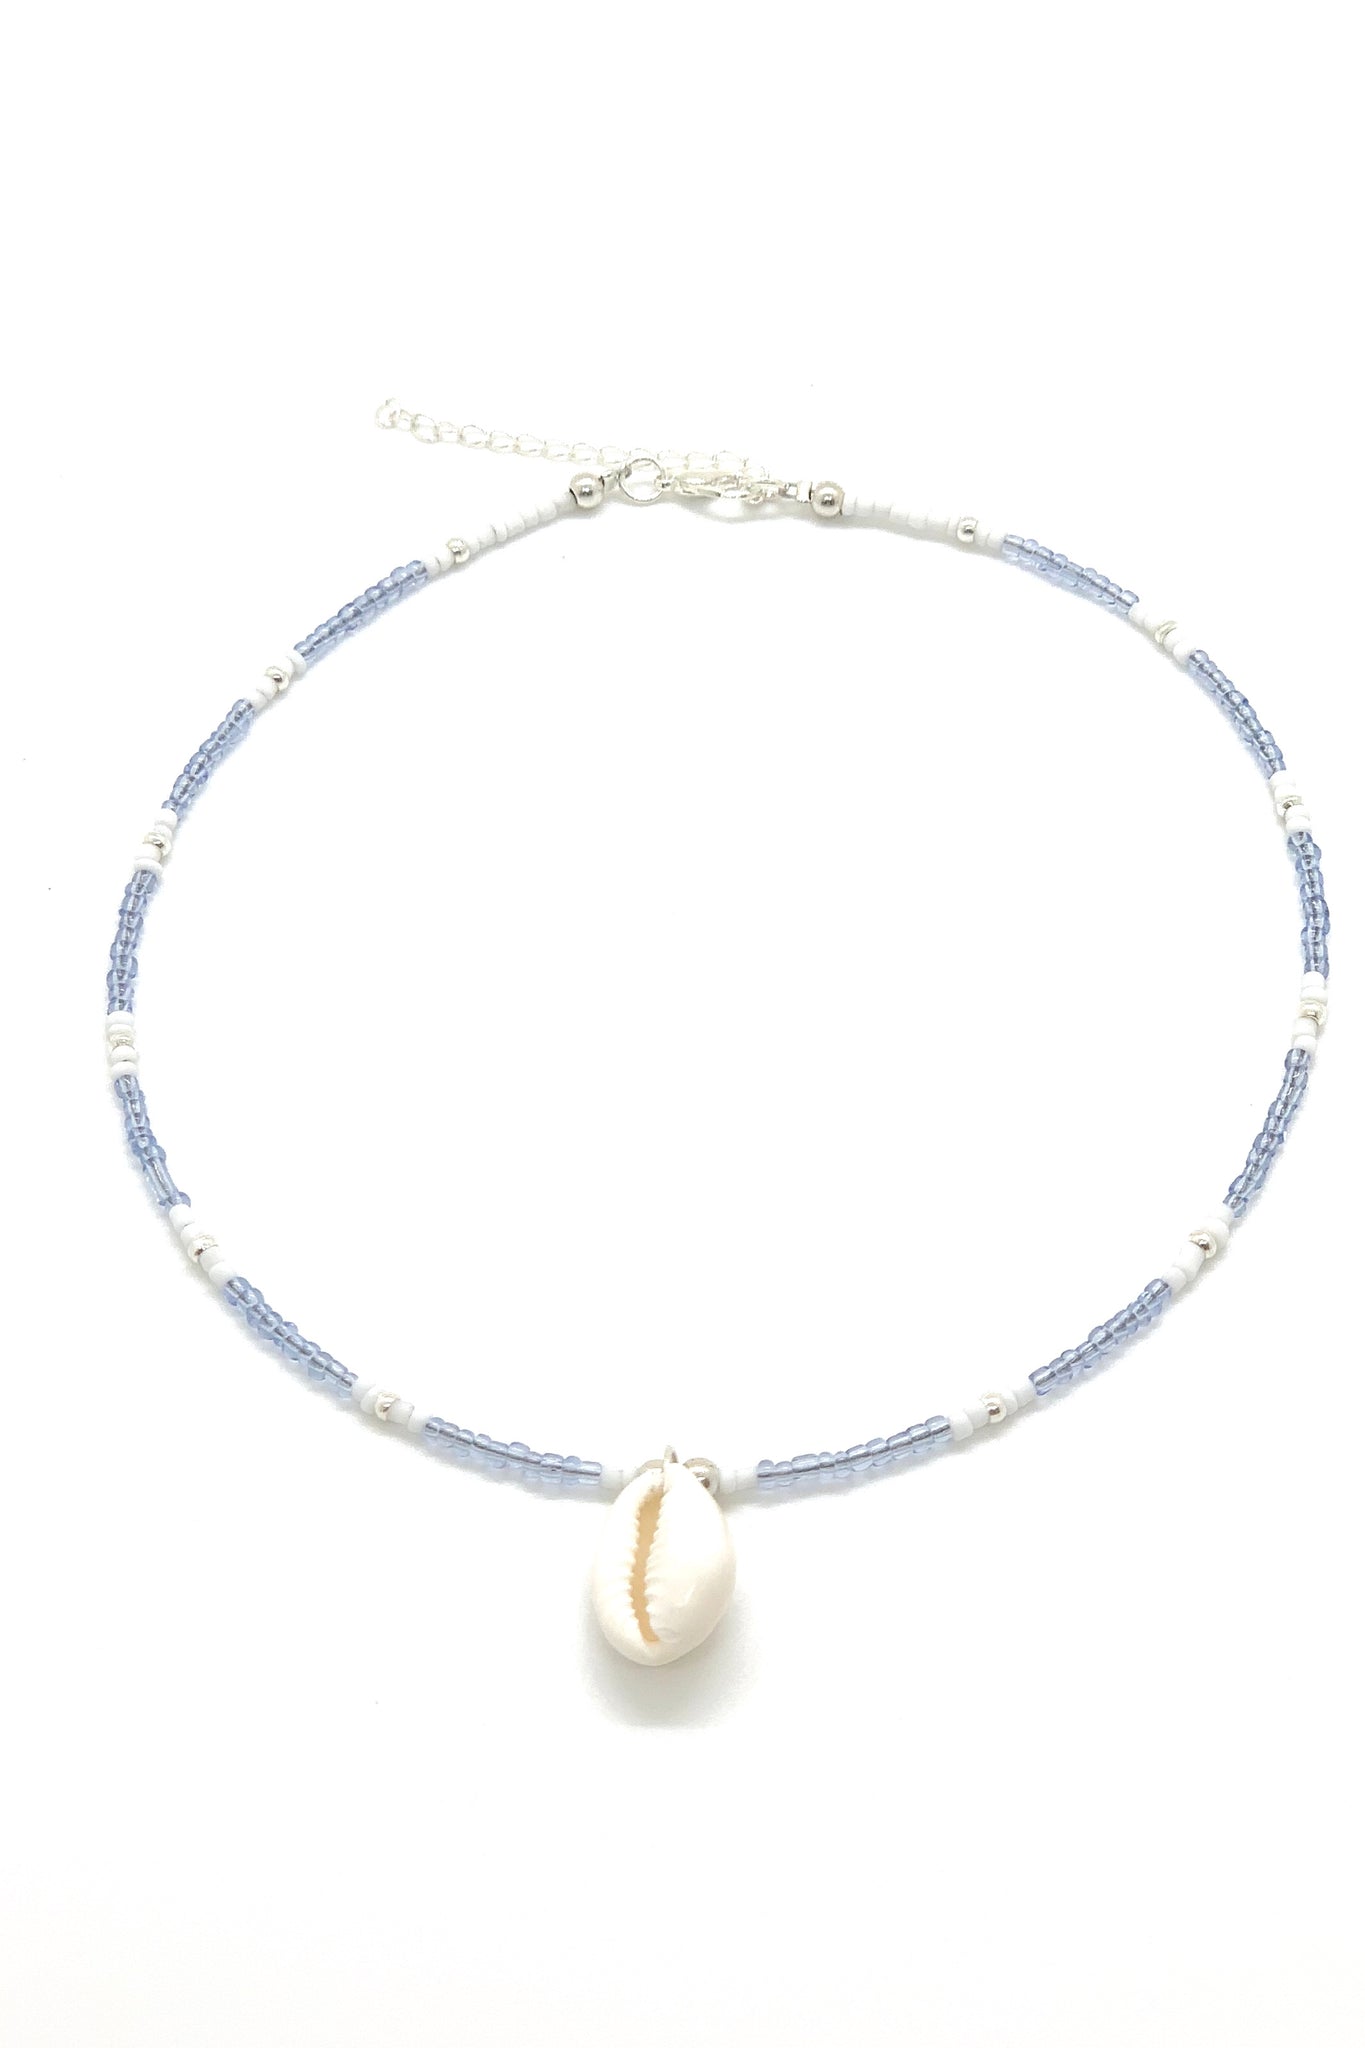 Short necklace in Blue & White with natural Shell